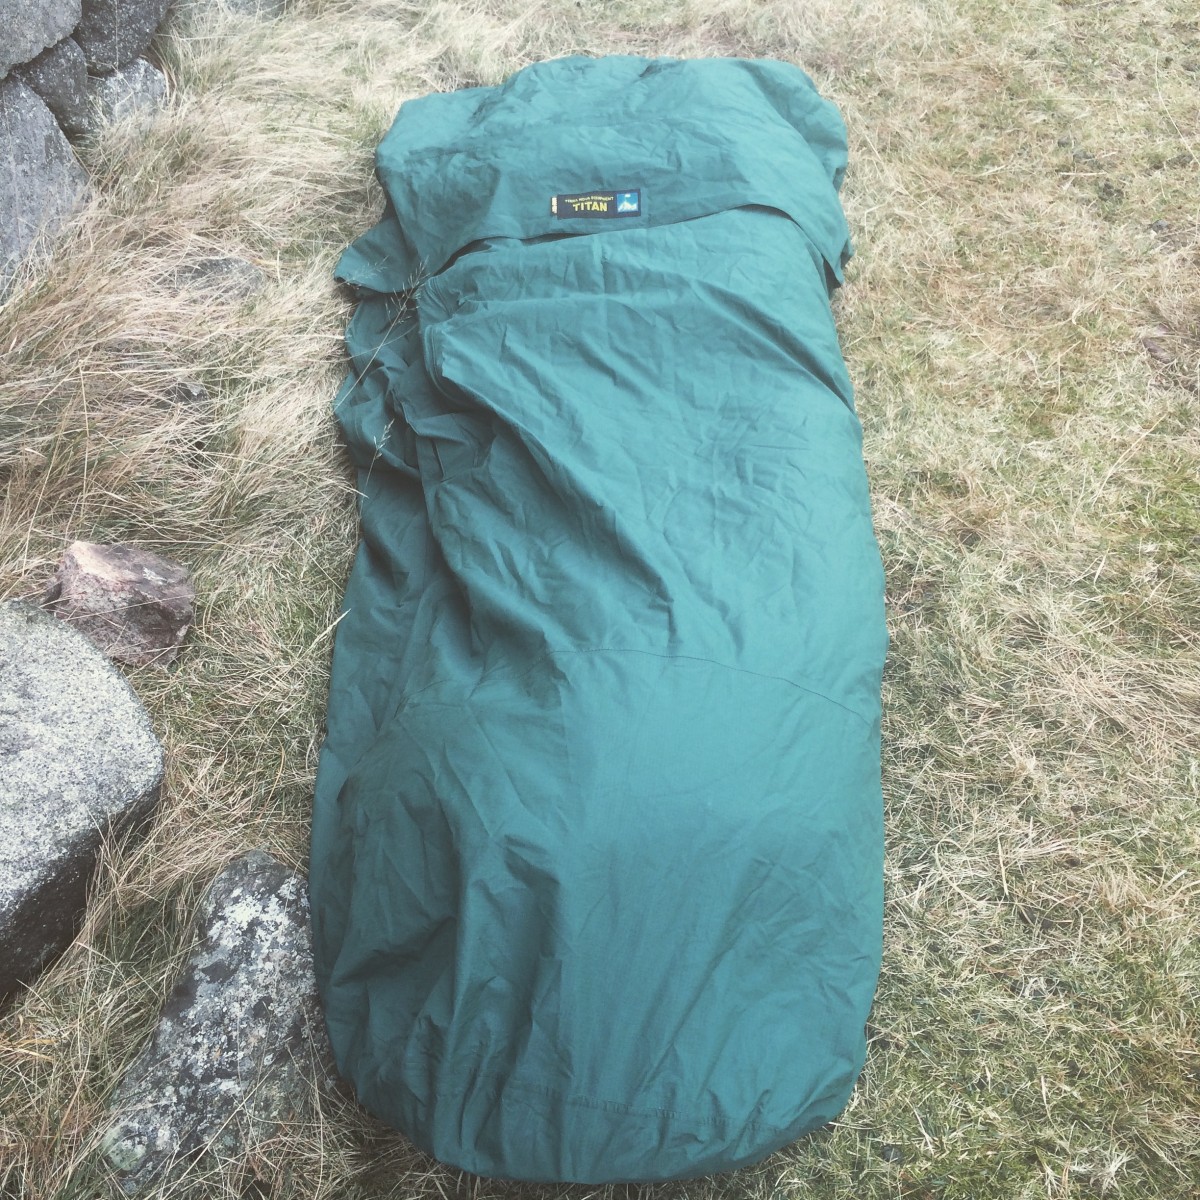 Titan Bivvy With xTherm Regular and lofted down bag inside